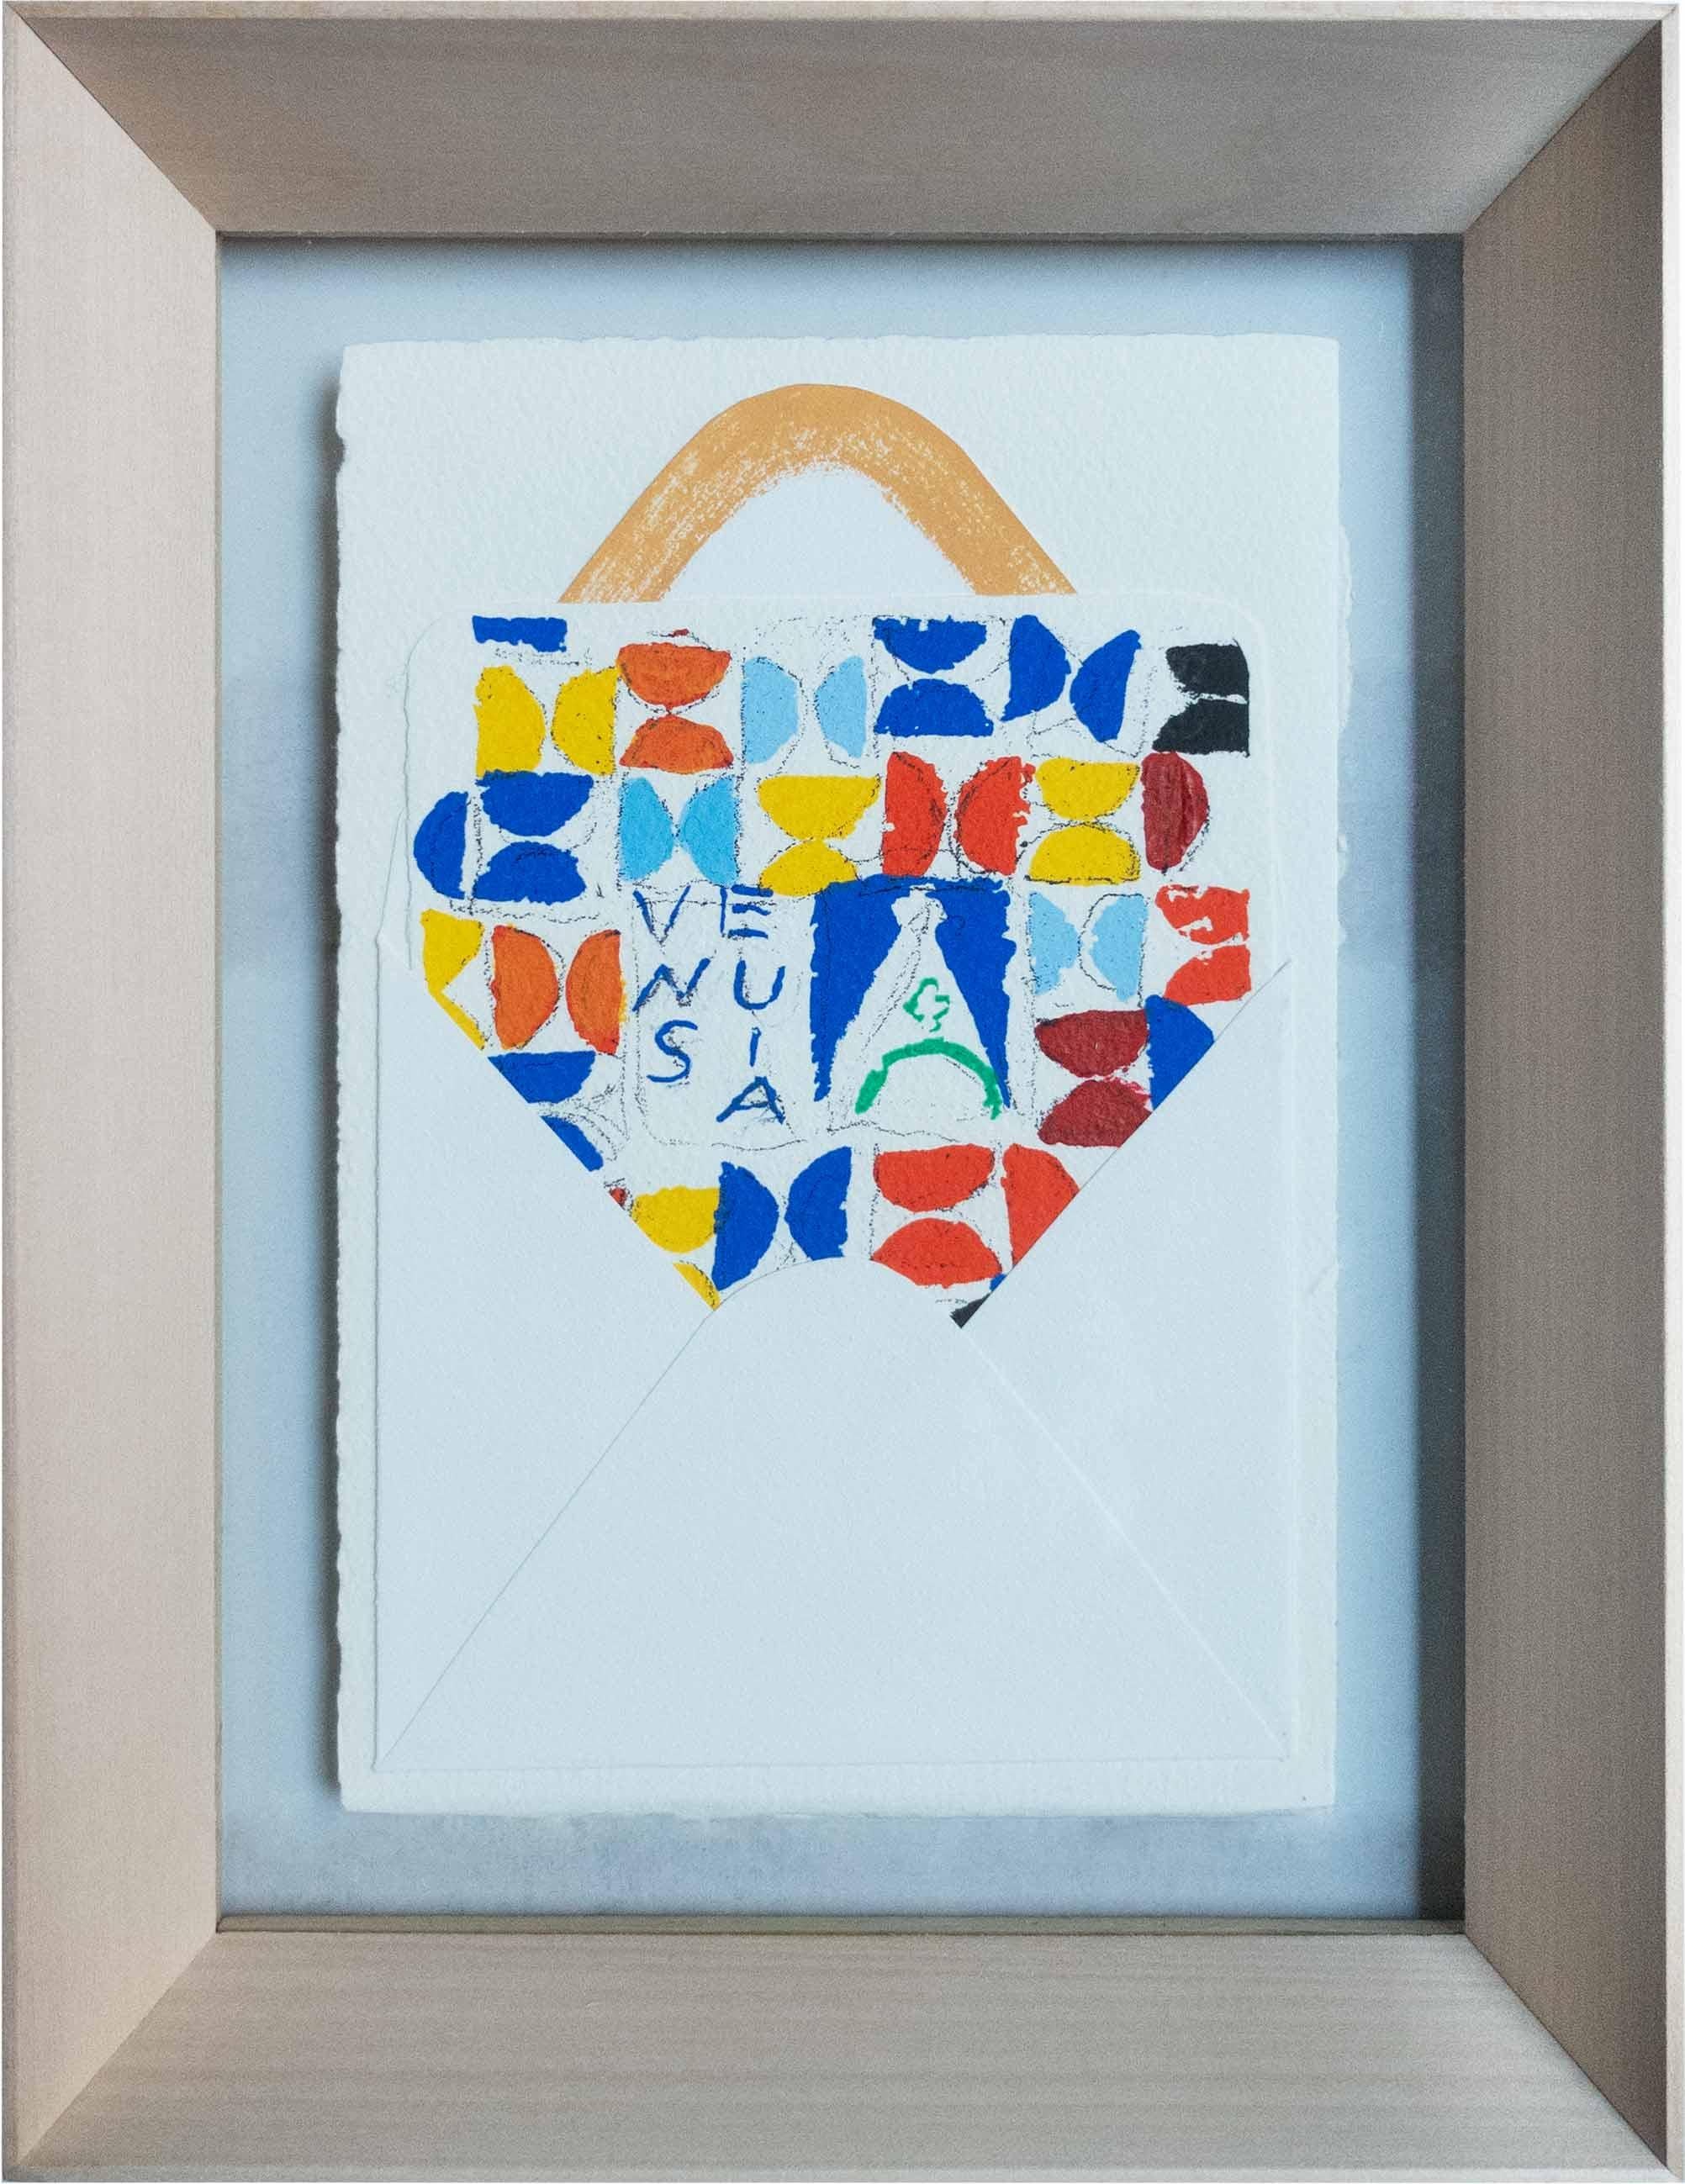 Screenprint by Joe Tilson dating back early '2010.
The artwork is framed with double glass and is signed and numbered with roman numbers with pencil on verso V/XX
Frame measurements: cm 31,5 x 24 x 6

Literature:
- Tilson The Stones of Venice –